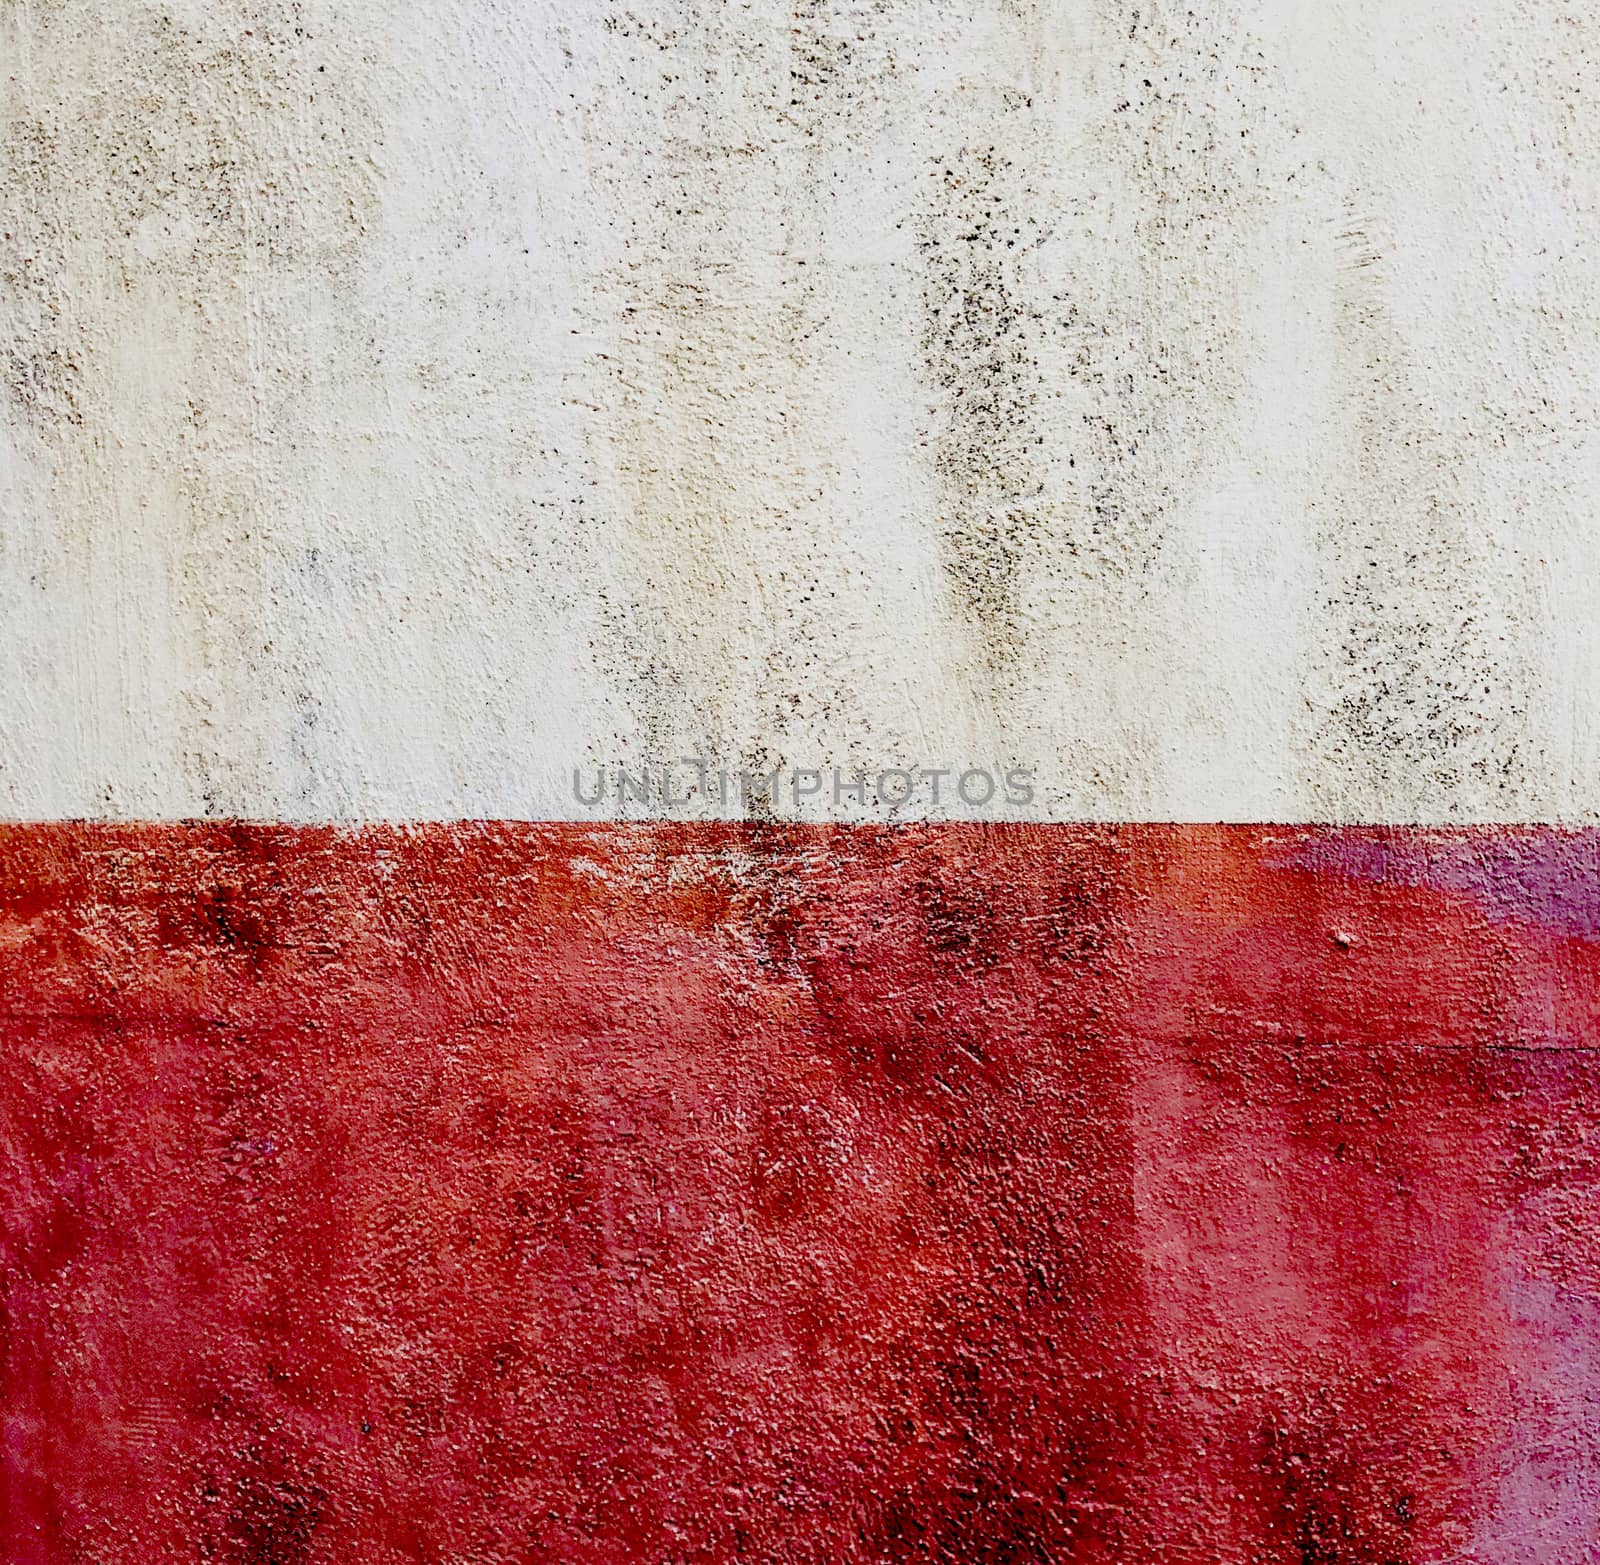 colorfull vibrant outdoor bumpy red vintage wall by F1b0nacci